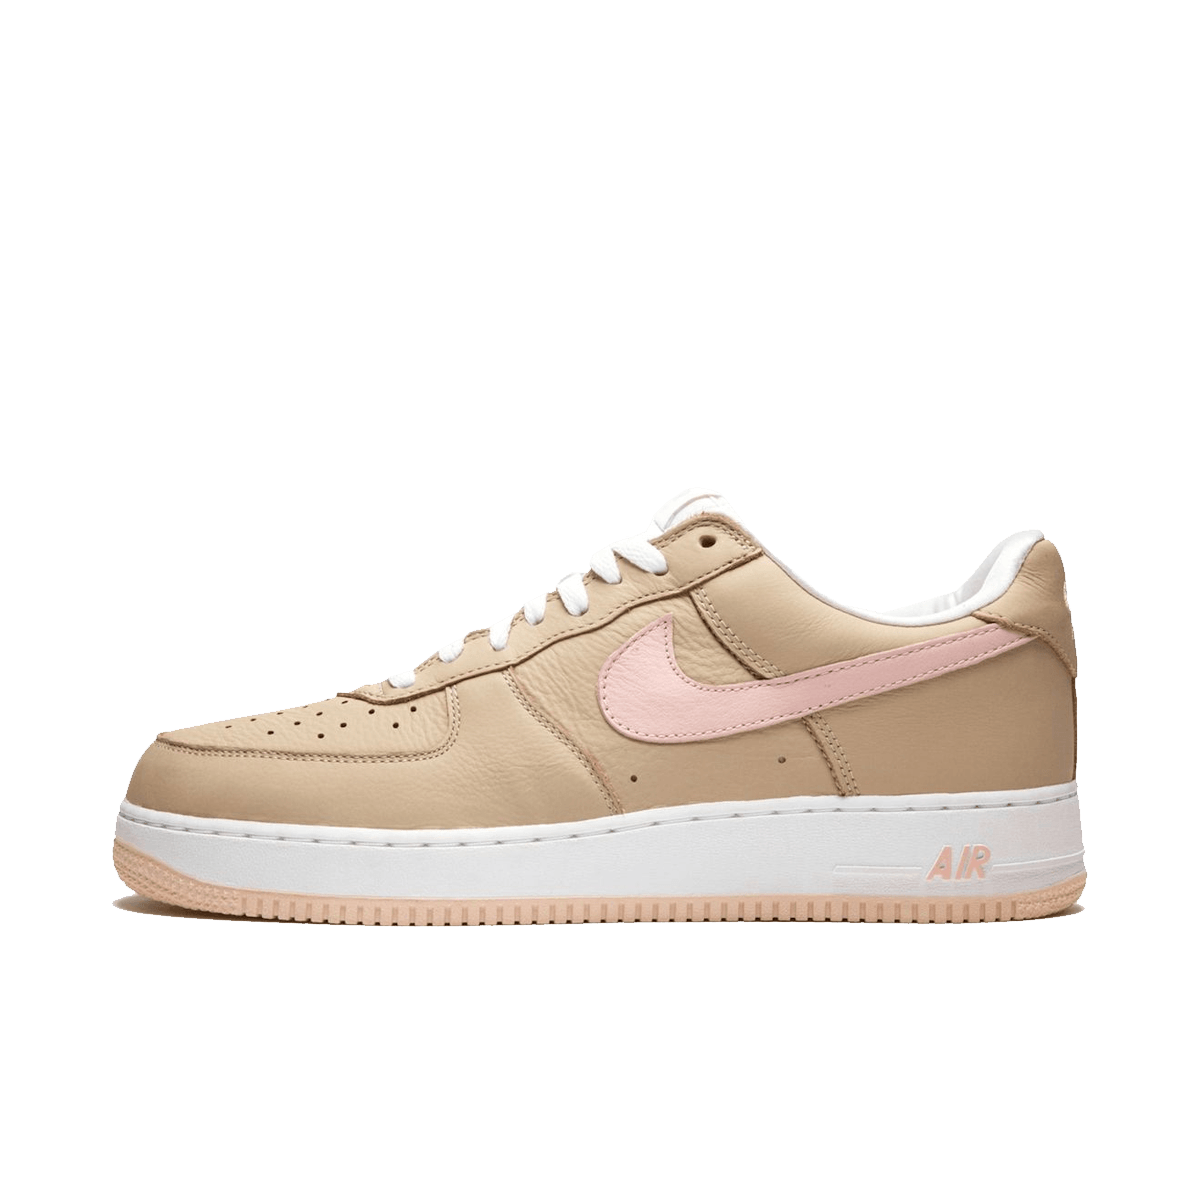 Kith x Nike Air Force 1 Low Retro 'Linen' 845053-201